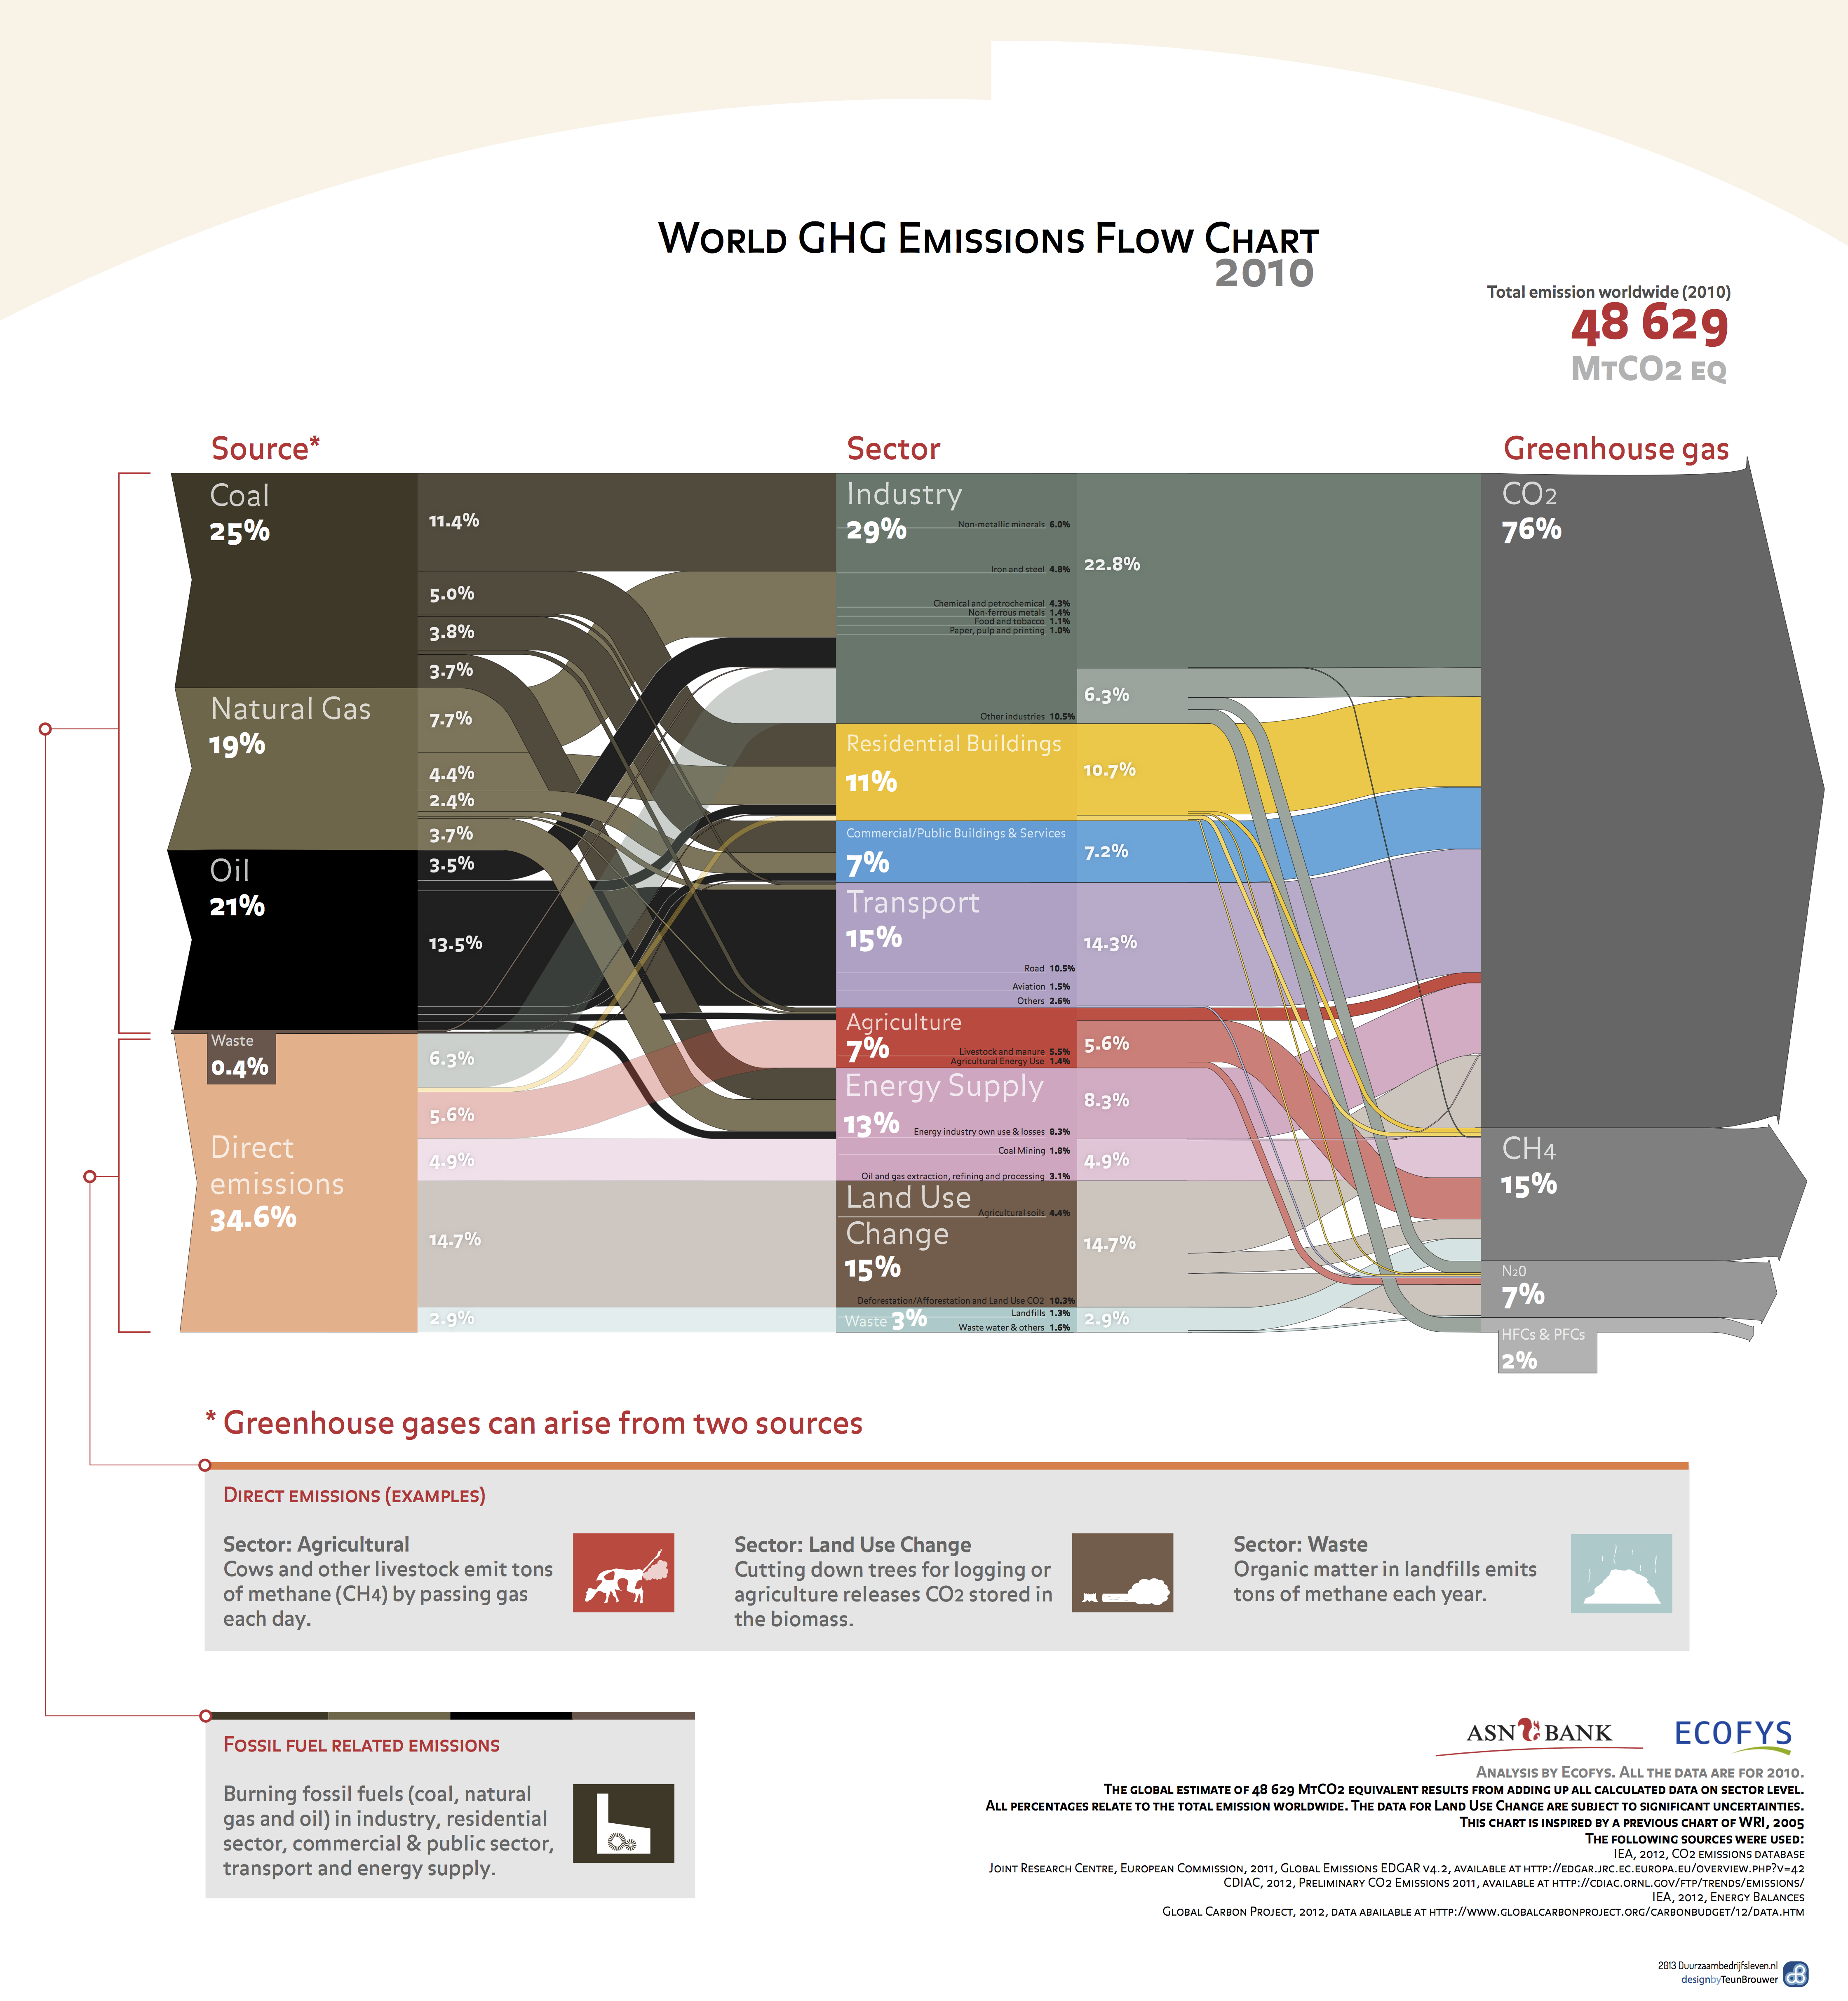 Where greenhouse gases come from